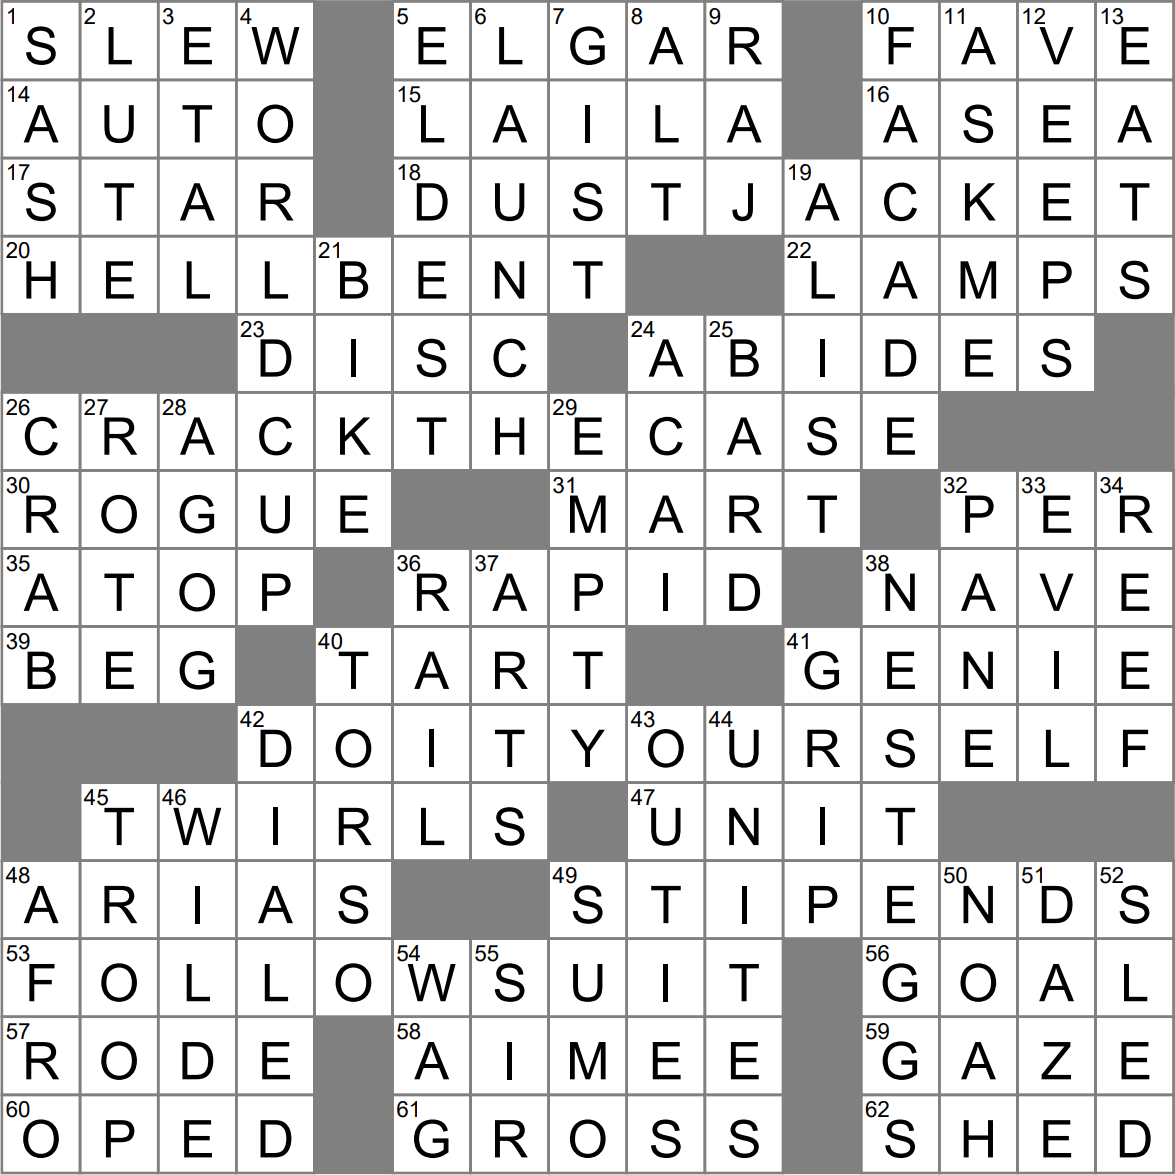 Recklessly committed crossword clue Archives LAXCrossword com